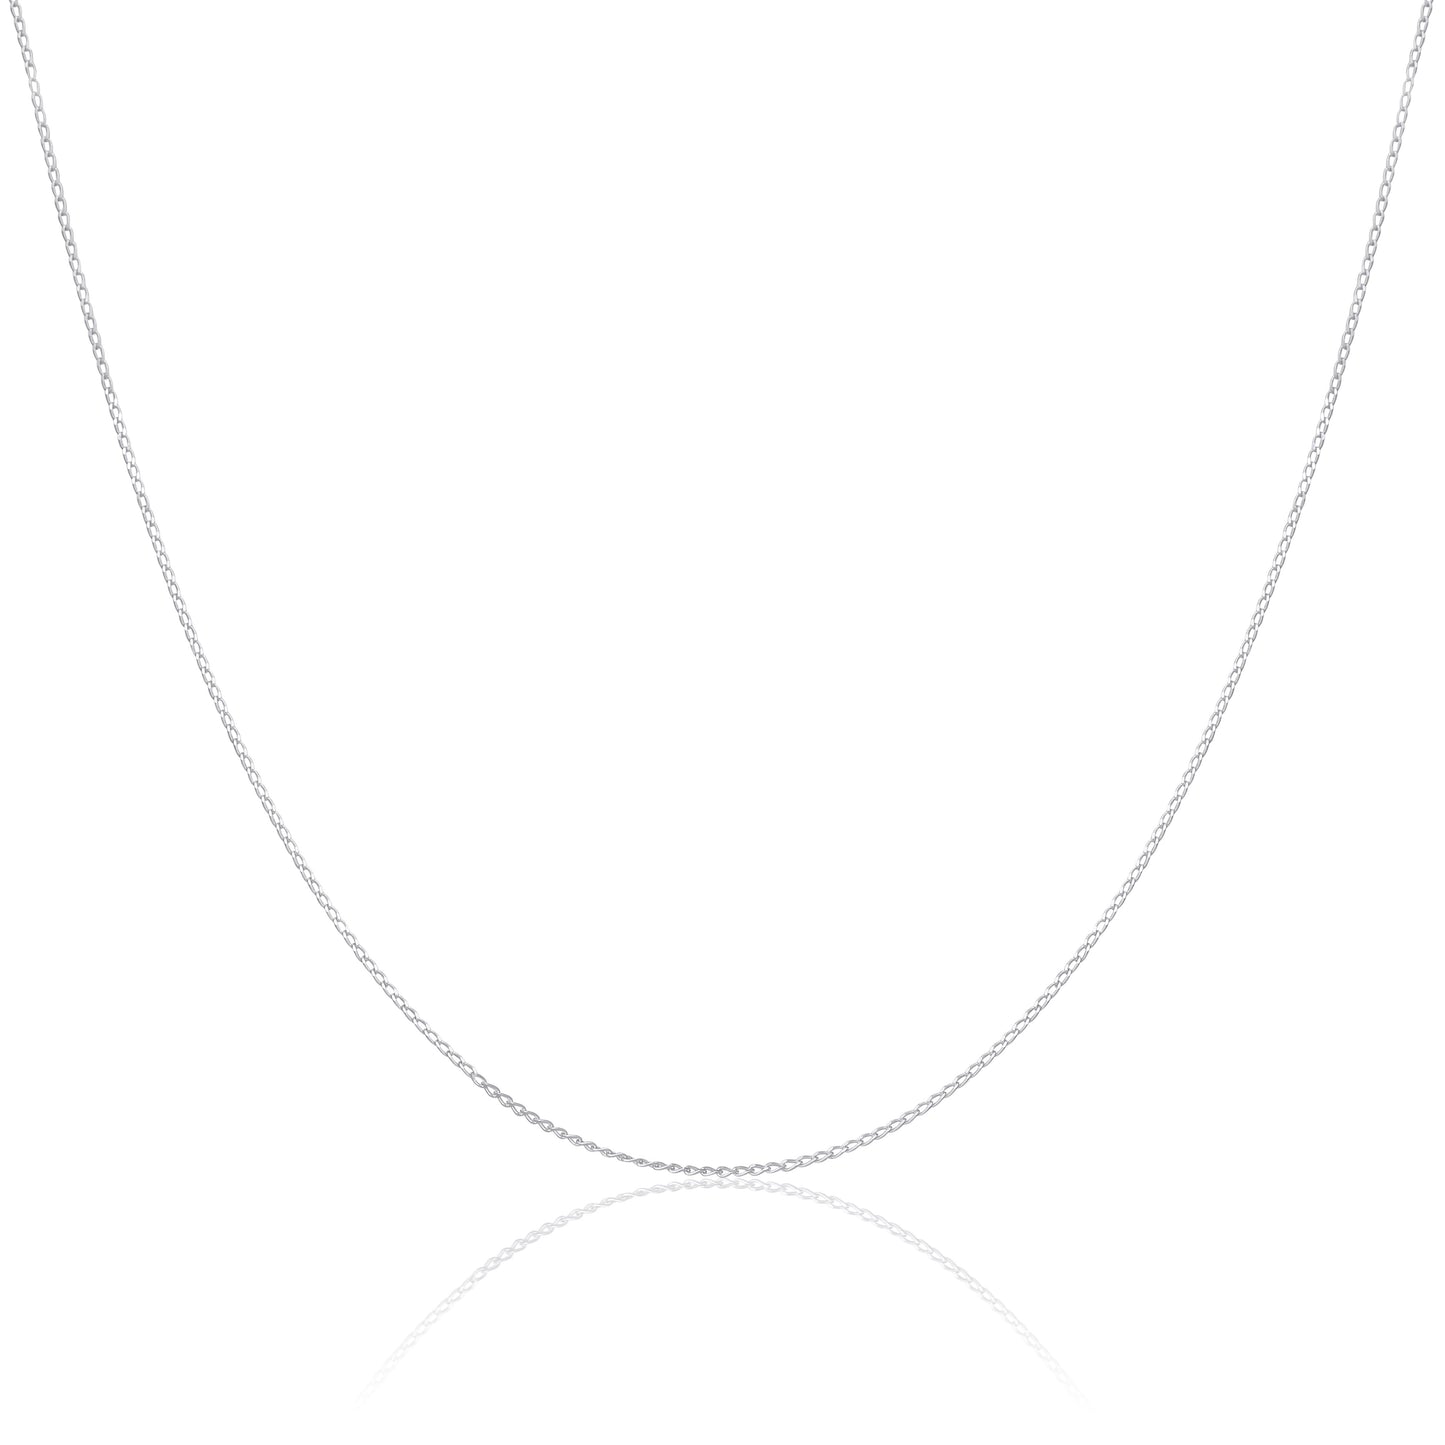 Sterling Silver Diamond Cut Elongated Curb Chain 14 - 22 Inches